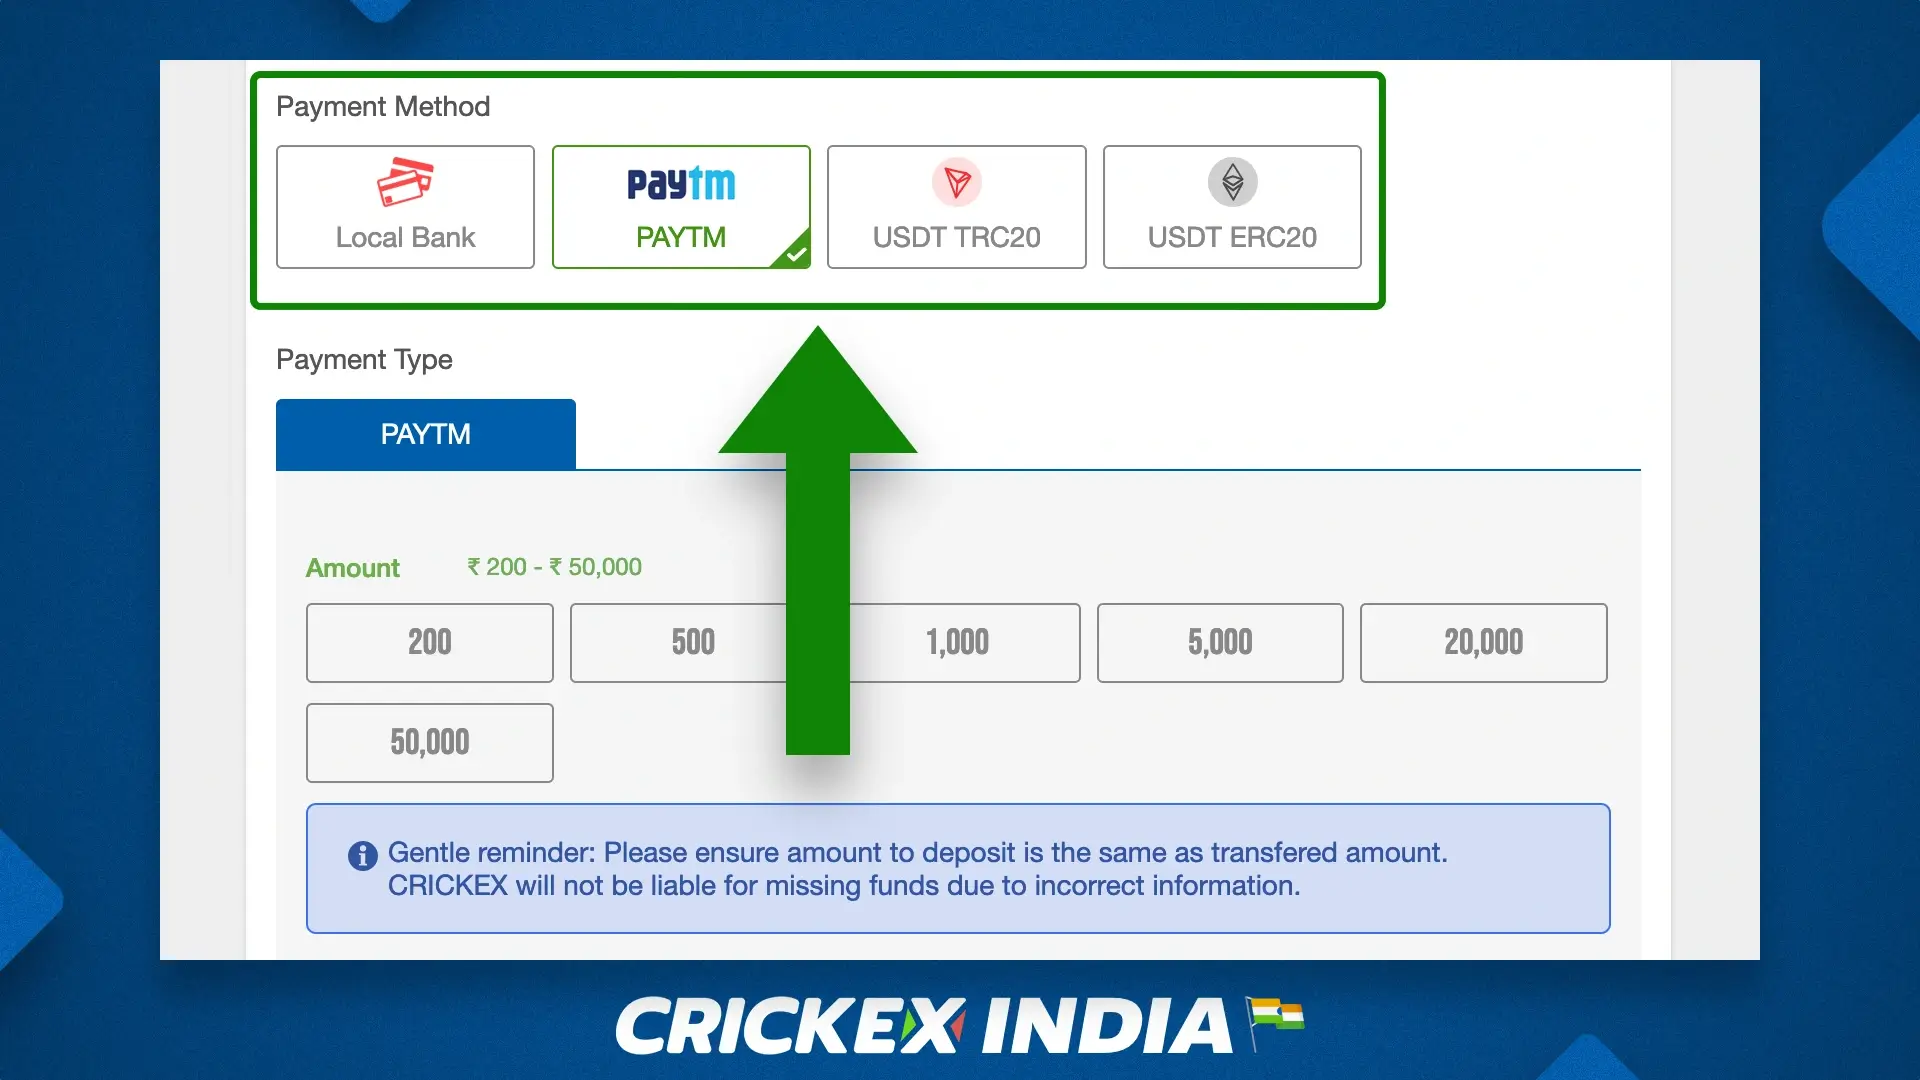 Choosing a payment method to deposit on the Crickex website